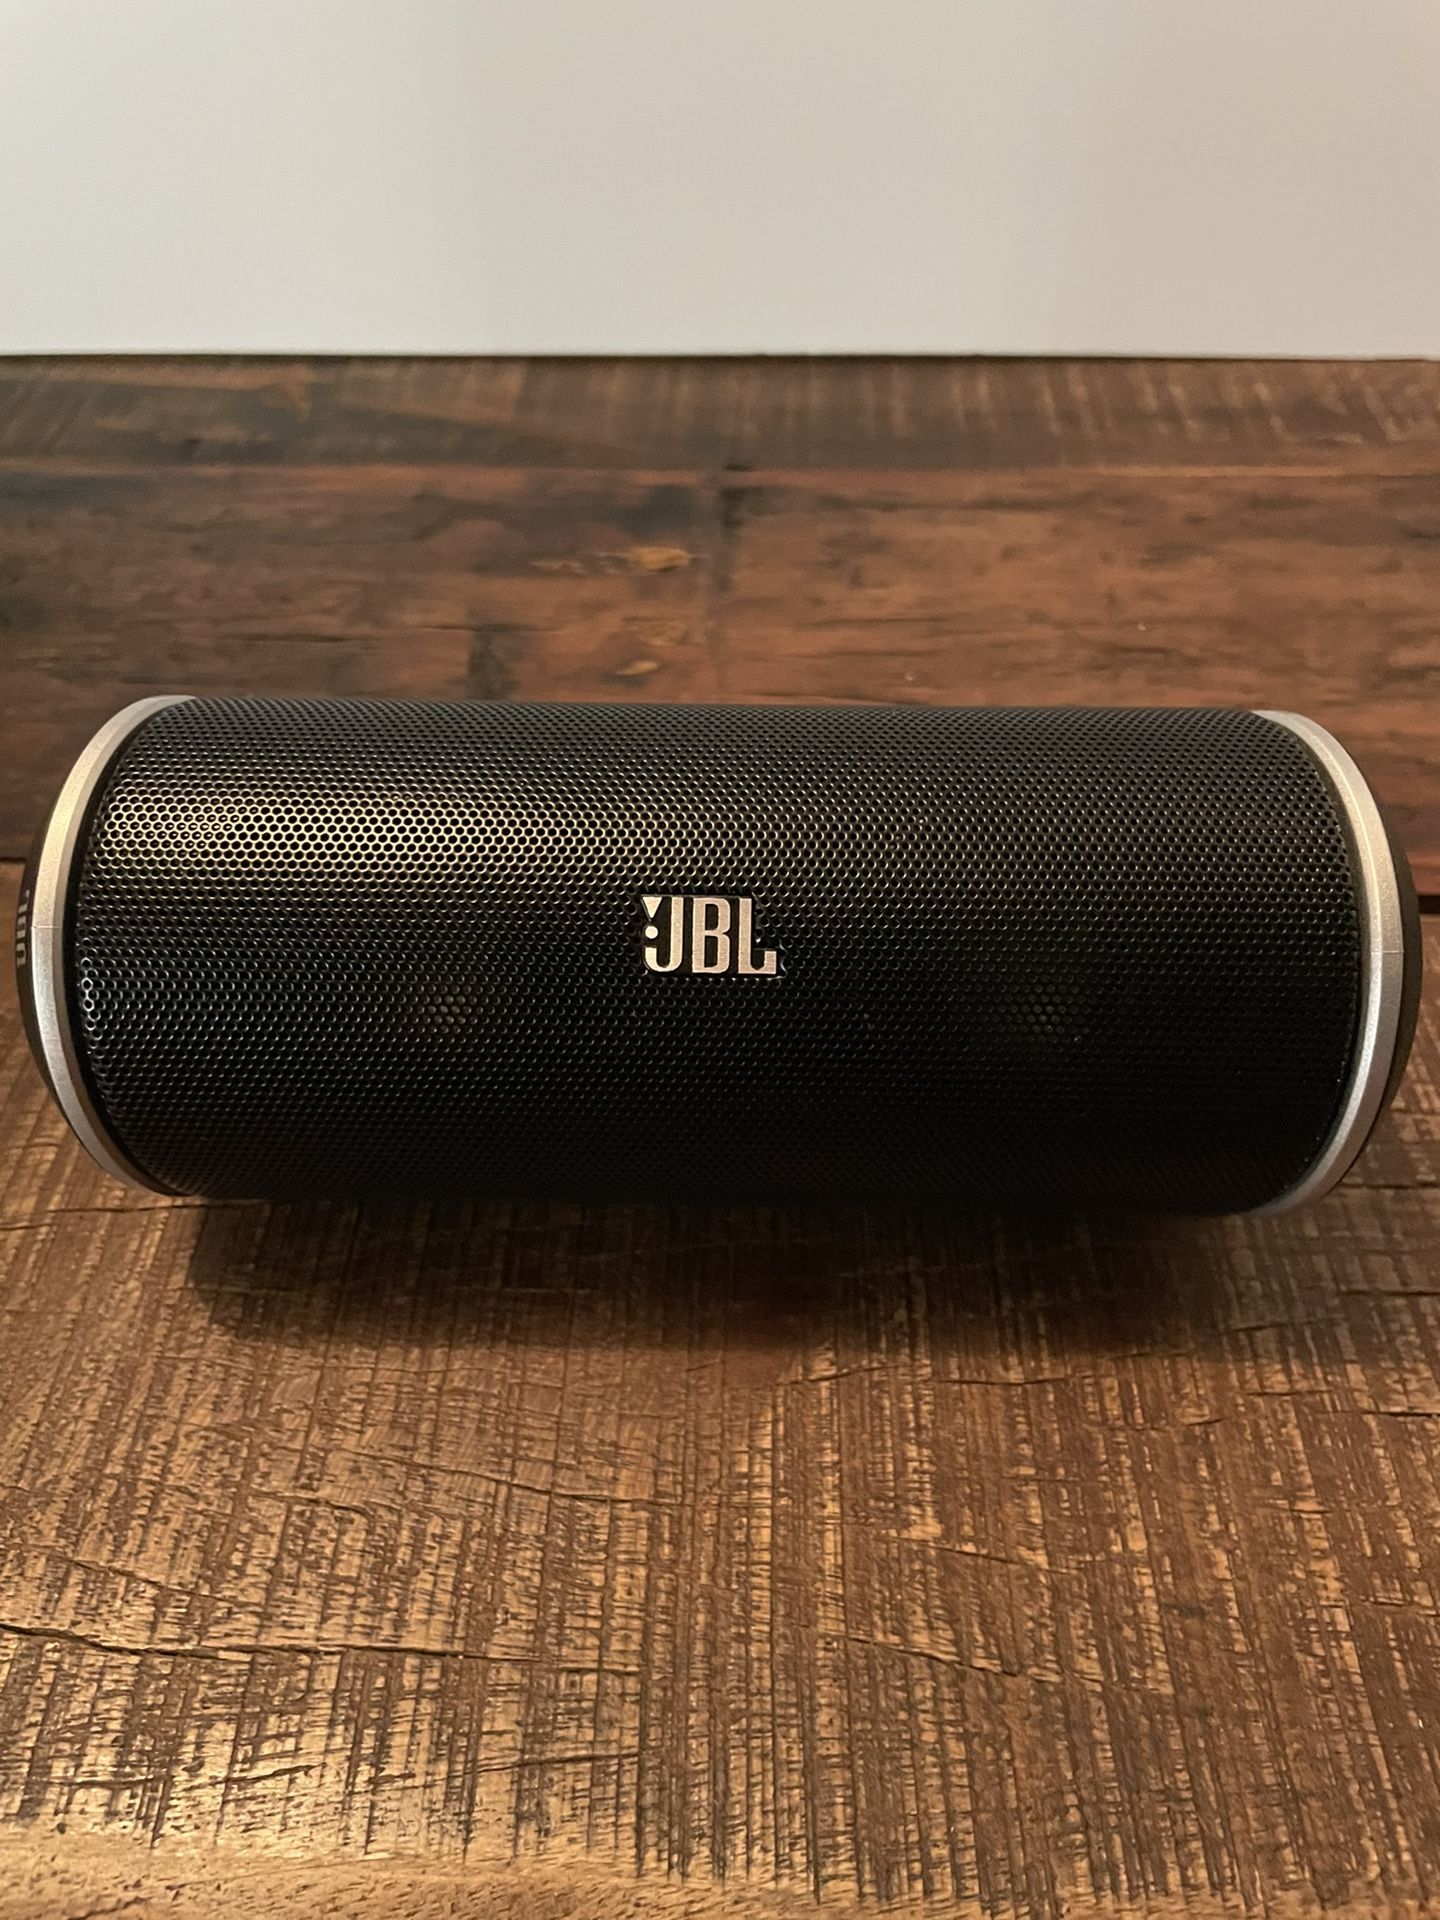 JBL Flip 1 Portable Bluetooth Stereo Speaker with Portable Charging Cable